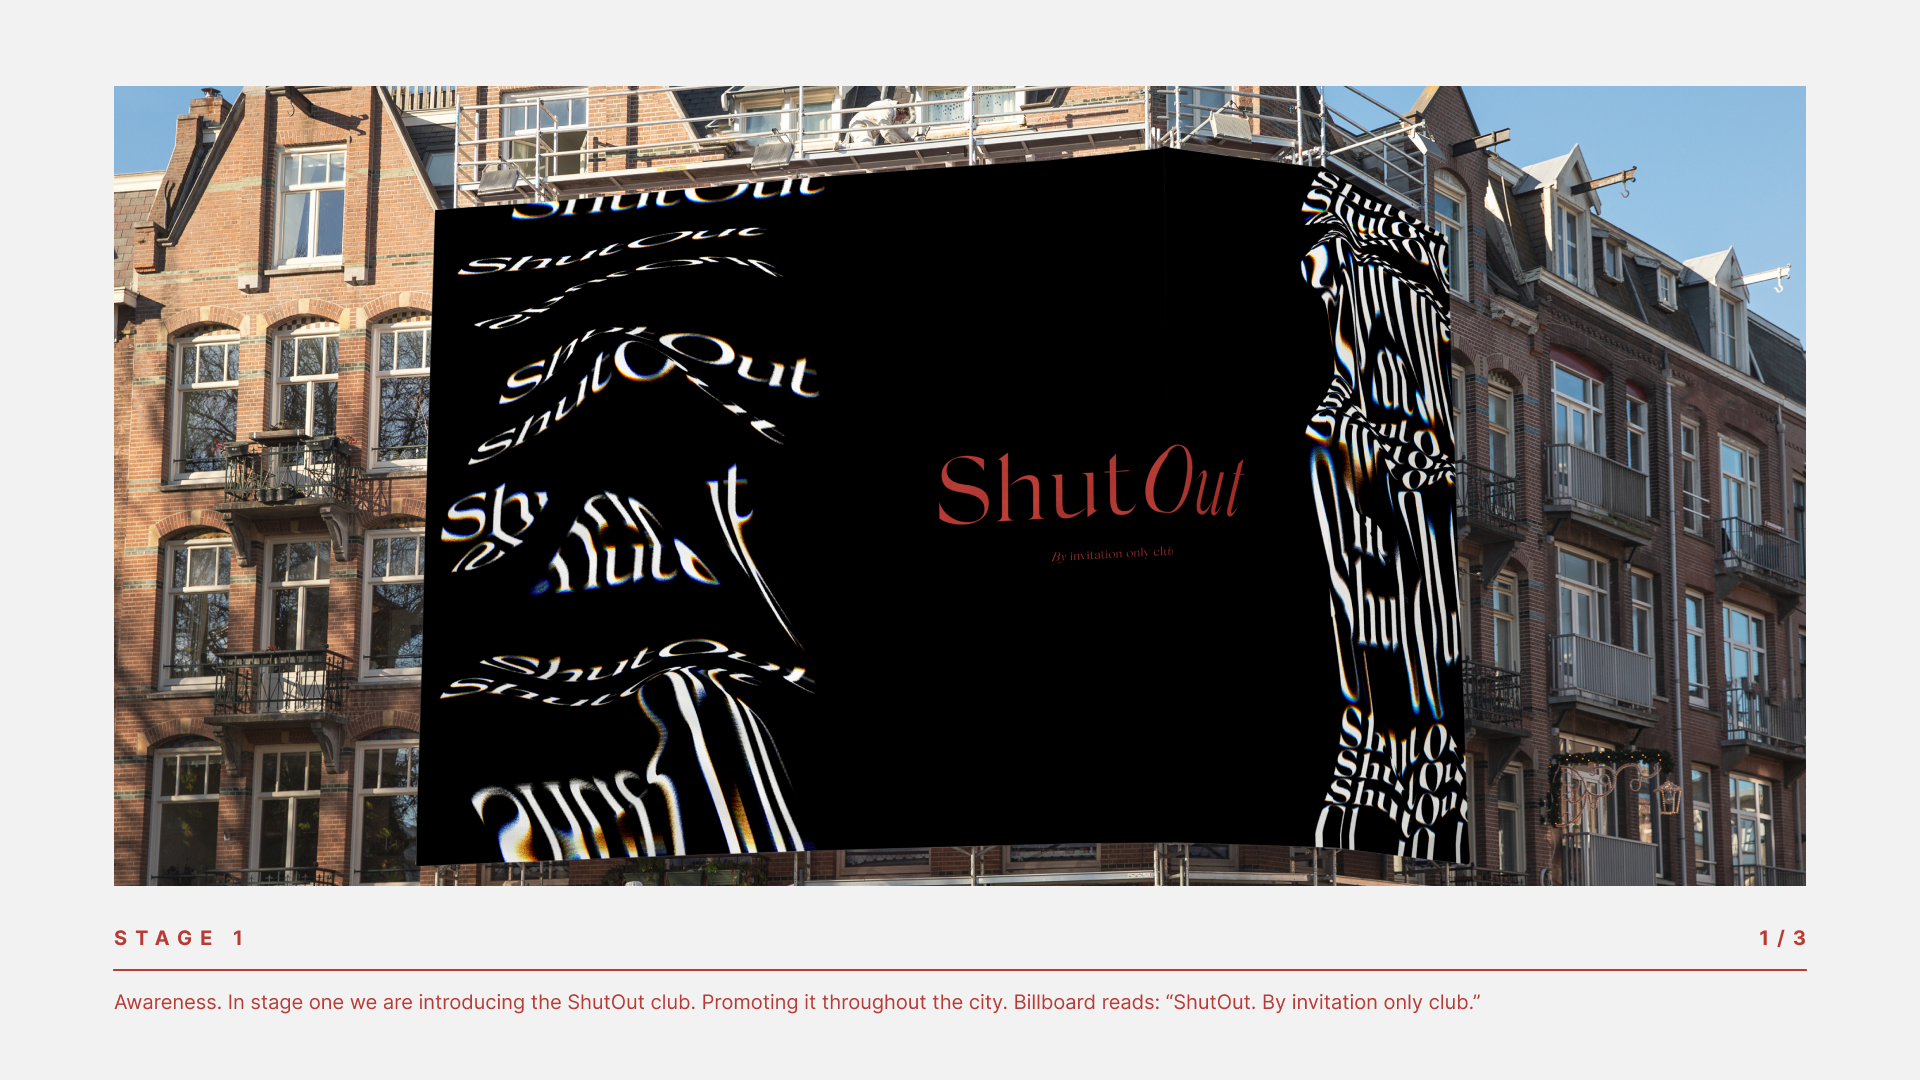 STAGE 1 Awareness. In stage one we are introducing the ShutOut club. Promoting it throughout the city. Billboard reads: “ShutOut. By invitation only club.”